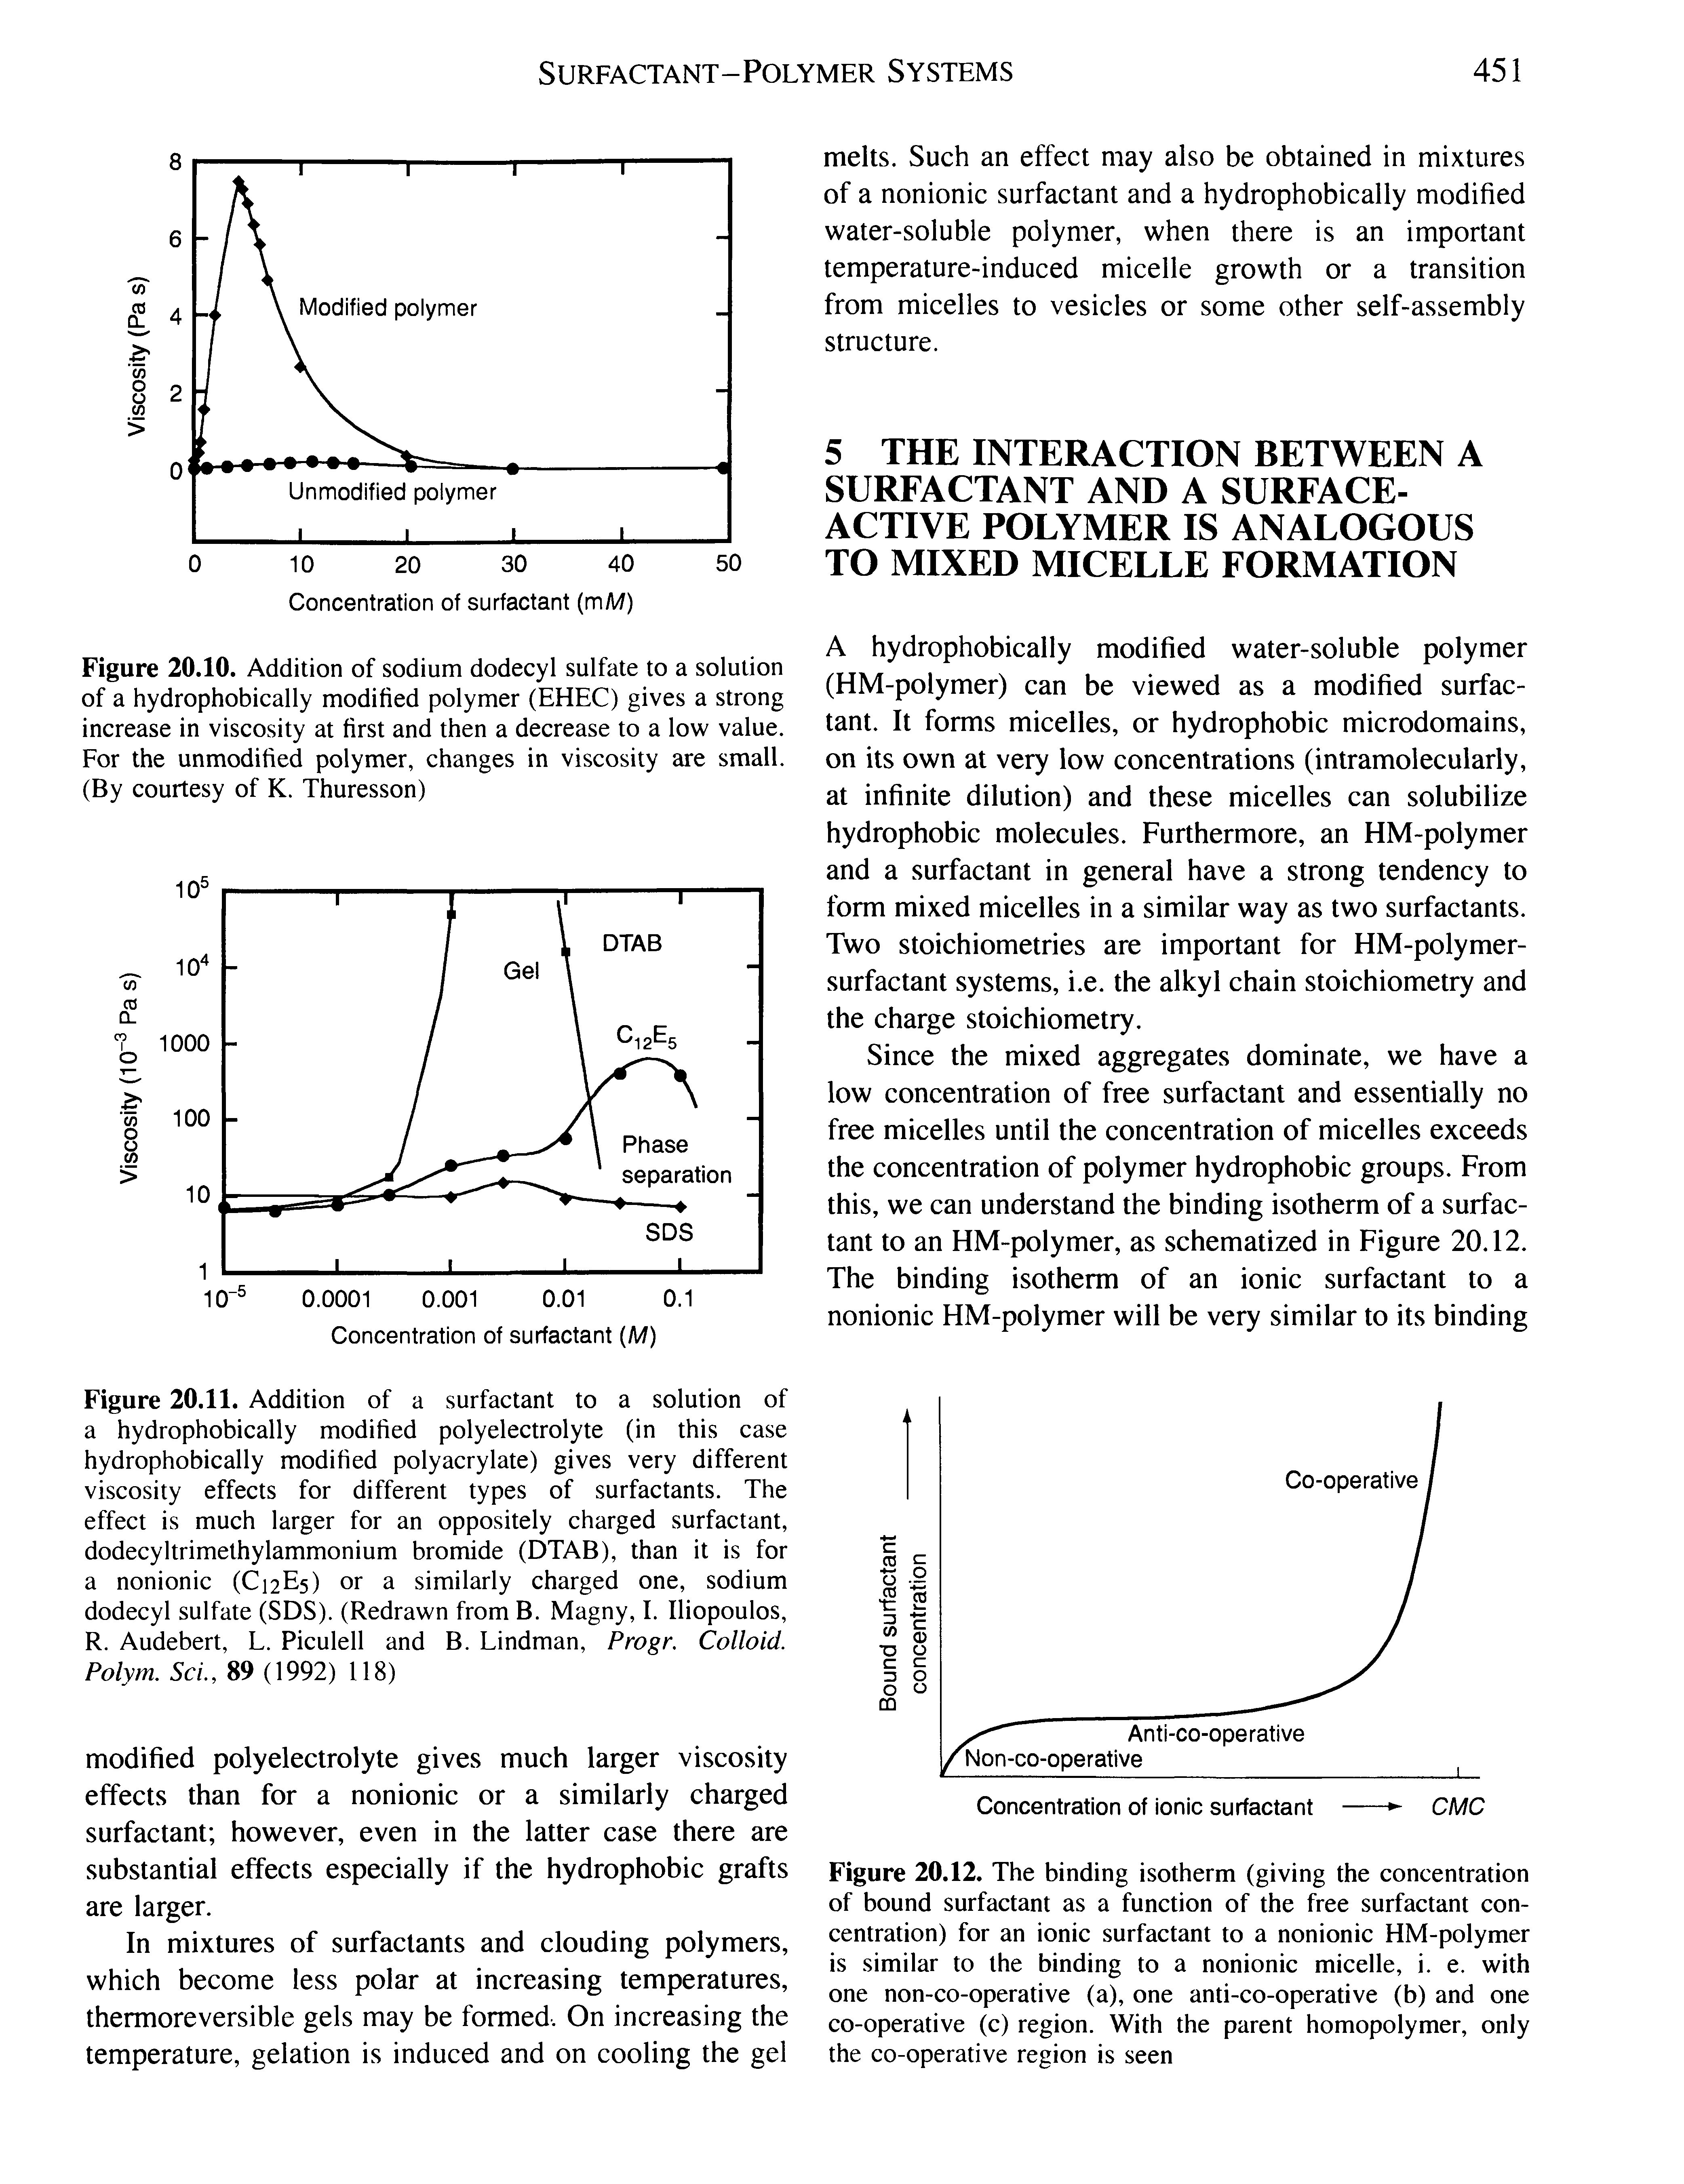 Figure 20.11. Addition of a surfactant to a solution of a hydrophobically modified polyelectrolyte (in this case hydrophobically modified polyacrylate) gives very different viscosity effects for different types of surfactants. The effect is much larger for an oppositely charged surfactant, dodecyltrimethylammonium bromide (DTAB), than it is for a nonionic (C12E5) or a similarly charged one, sodium dodecyl sulfate (SDS). (Redrawn from B. Magny, I. Iliopoulos, R. Audebert, L. Piculell and B. Lindman, Progr. Colloid. Polym. ScL, 89 (1992) 118)...